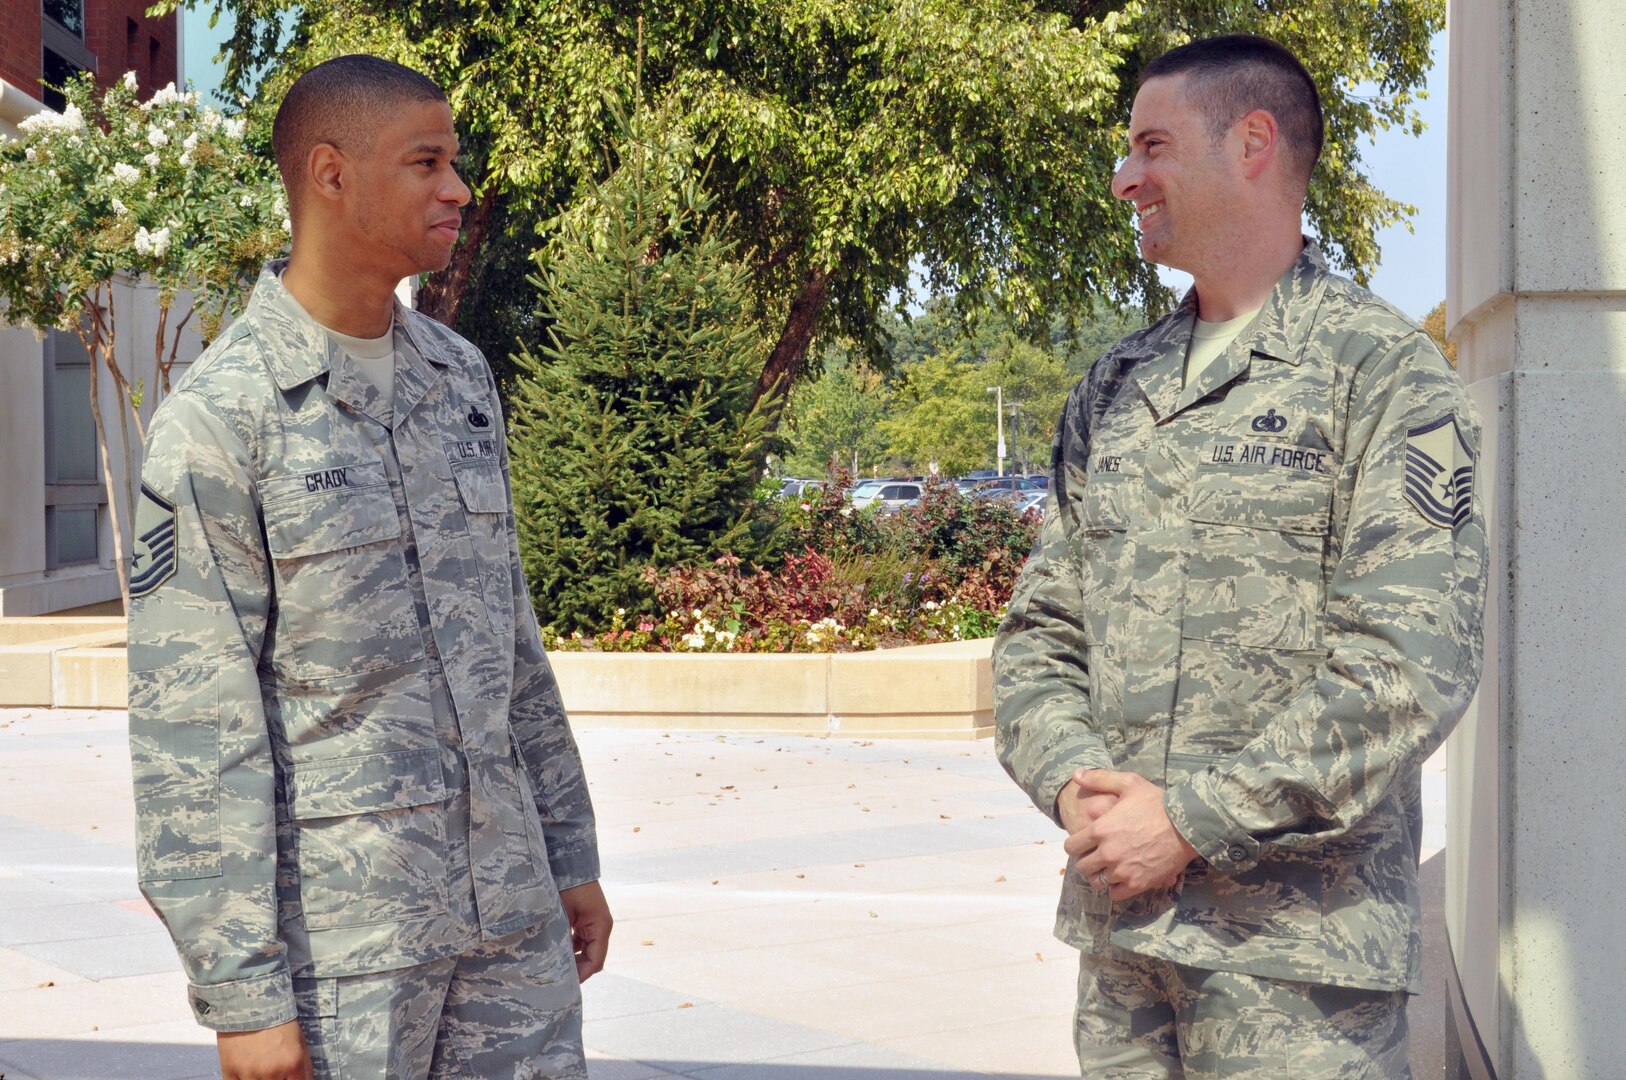 Air Force Master Sgts. Keith Grady and David Janes are two of only four Air Force Logistics Education Advancement Program noncommissioned officers in their Air Force career field. The LEAP is a career broadening education program designed to provide selected NCOs with on-the-job experience and training in special fuels logistics areas.